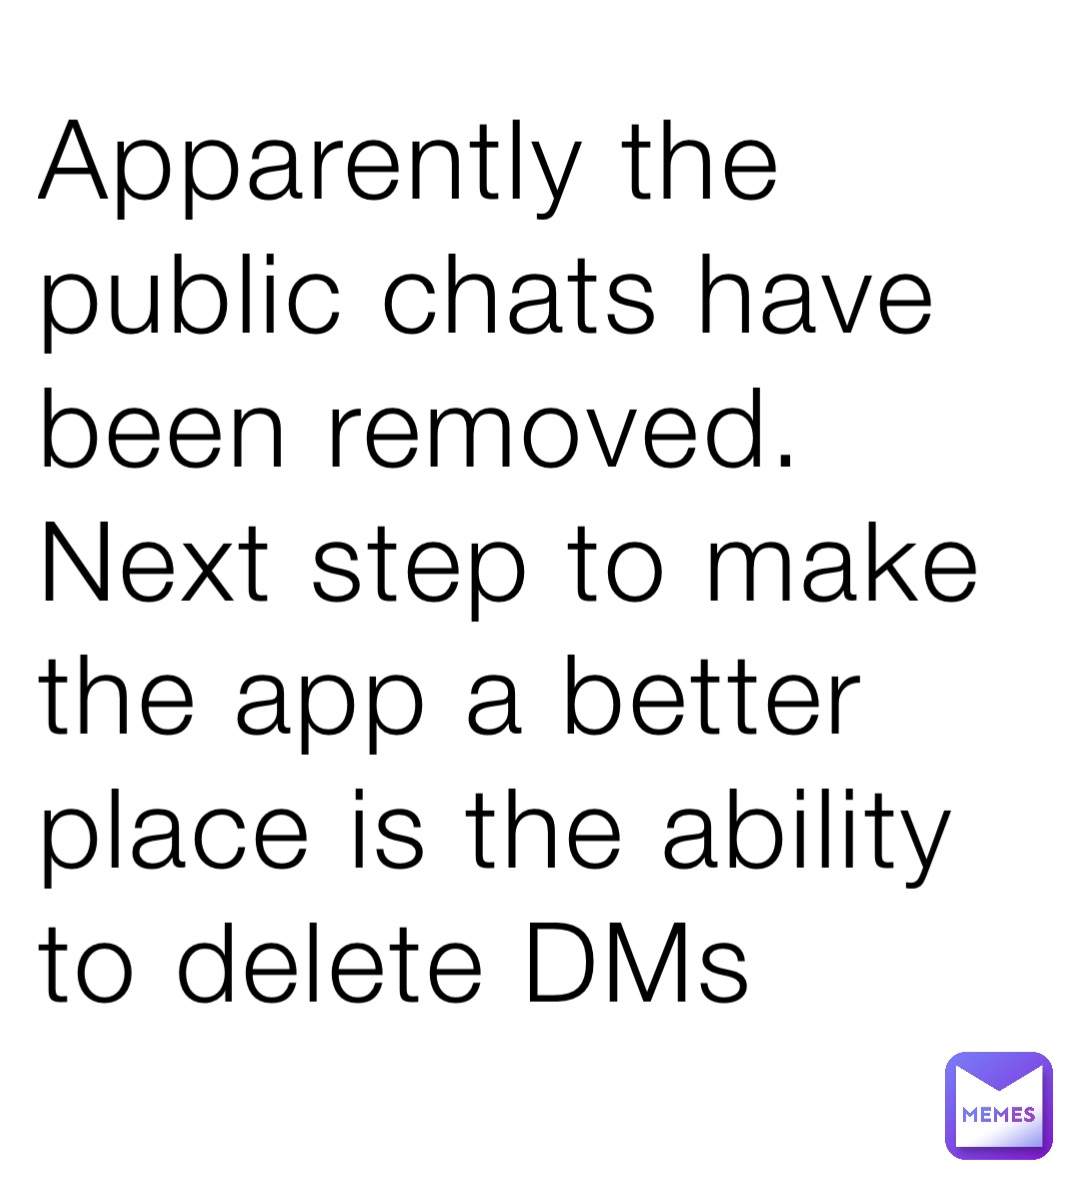 Apparently the public chats have been removed. Next step to make the app a better place is the ability to delete DMs